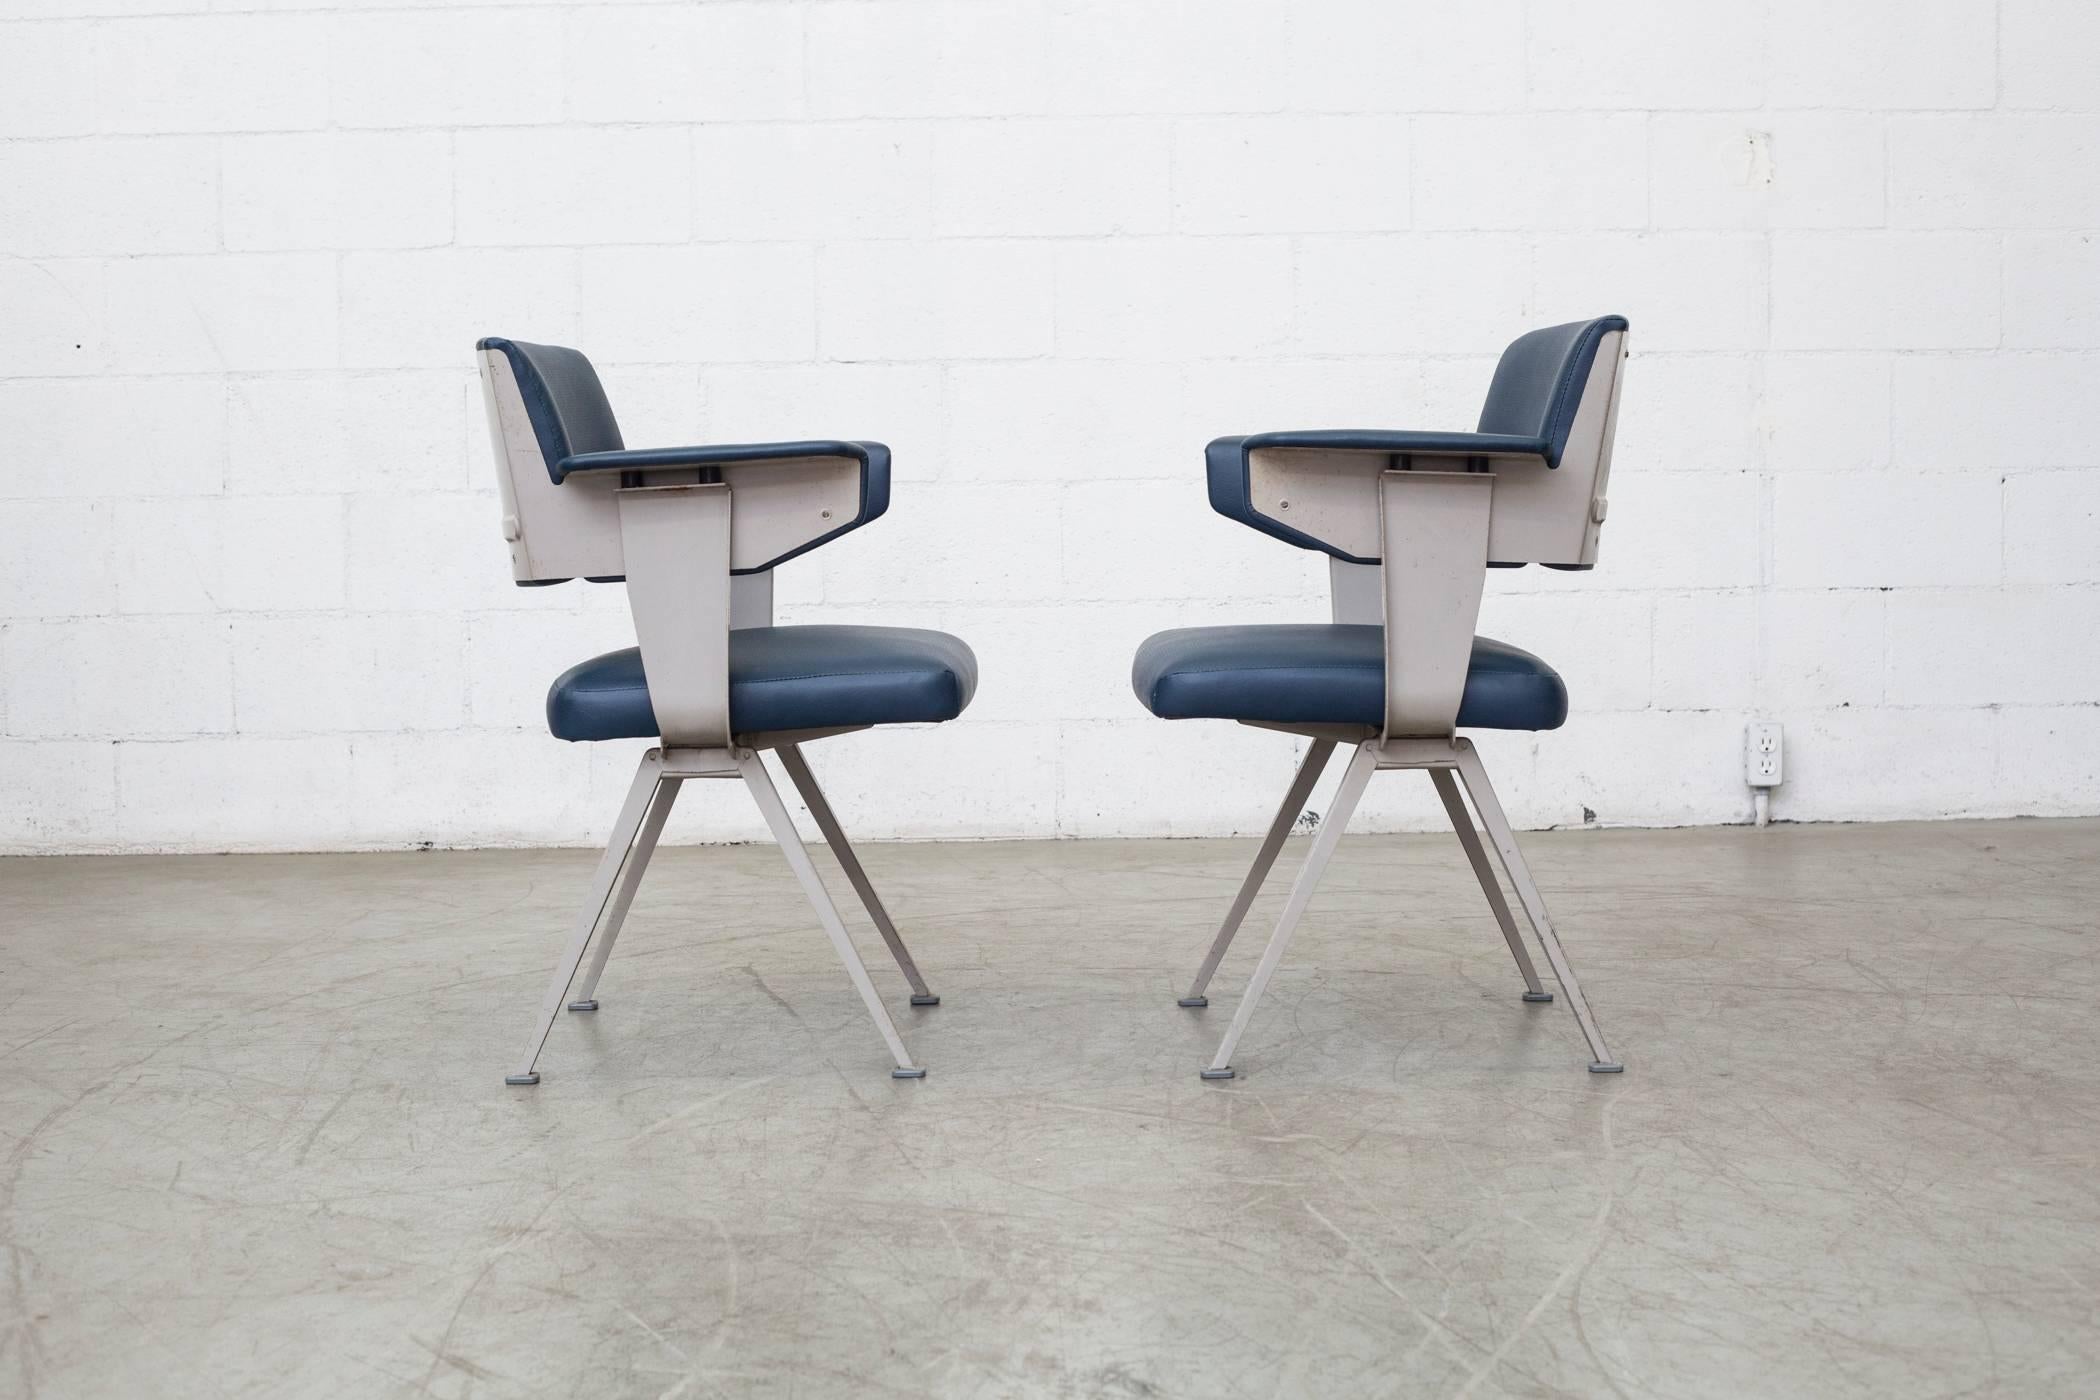 Original dove grey enameled metal frames with new indigo vinyl upholstery with perforated seat and solid back. Frames are in original condition with visible wear and scratching to enamel due to age and use. Set price.